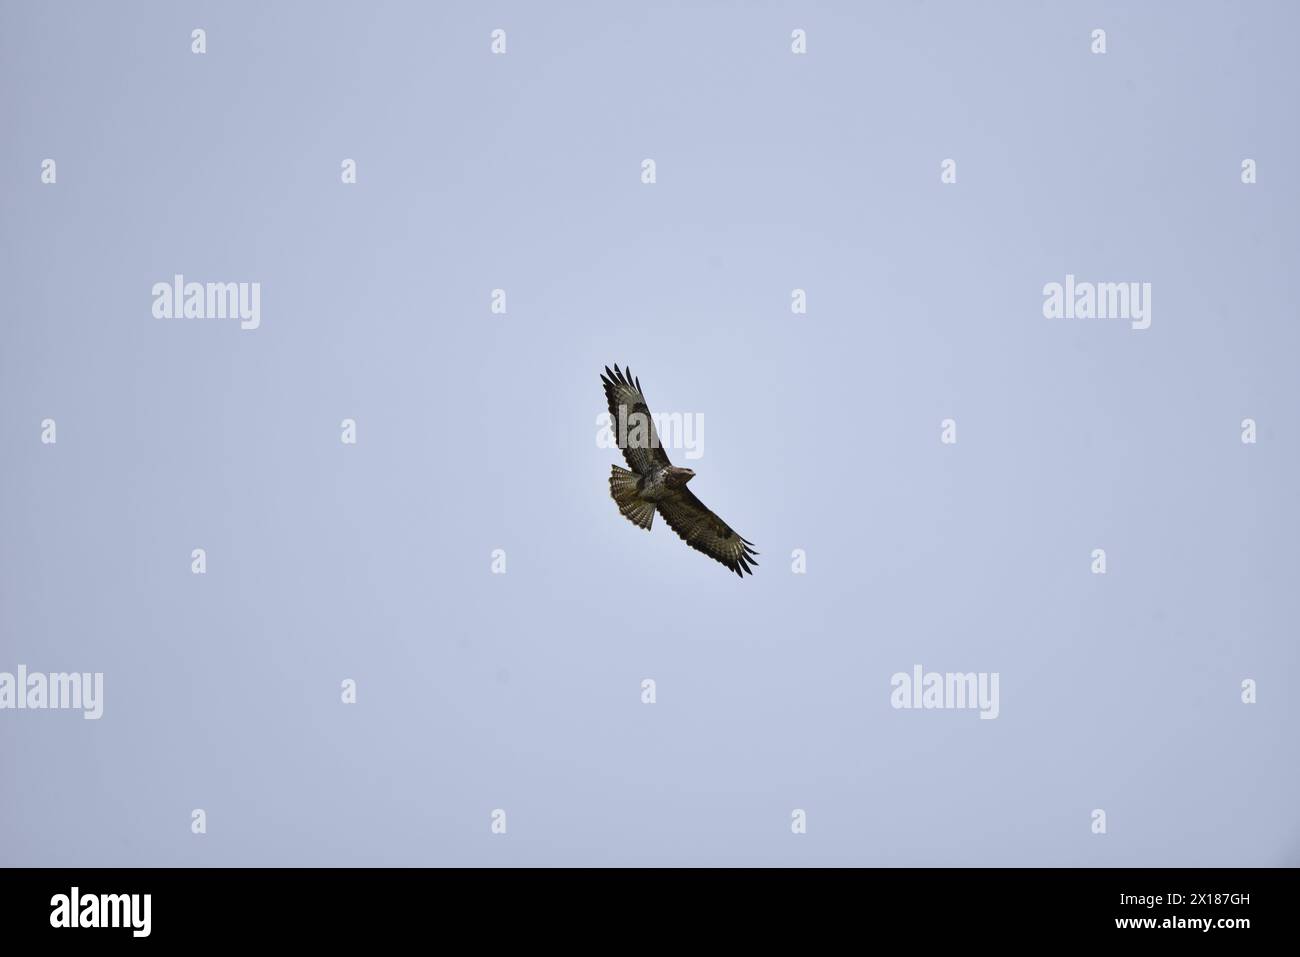 Common Buzzard (Buteo buteo) Flying Towards Camera with Wings Spread, against a Pale Blue Sky, taken in the Welsh Countryside in Spring Stock Photo